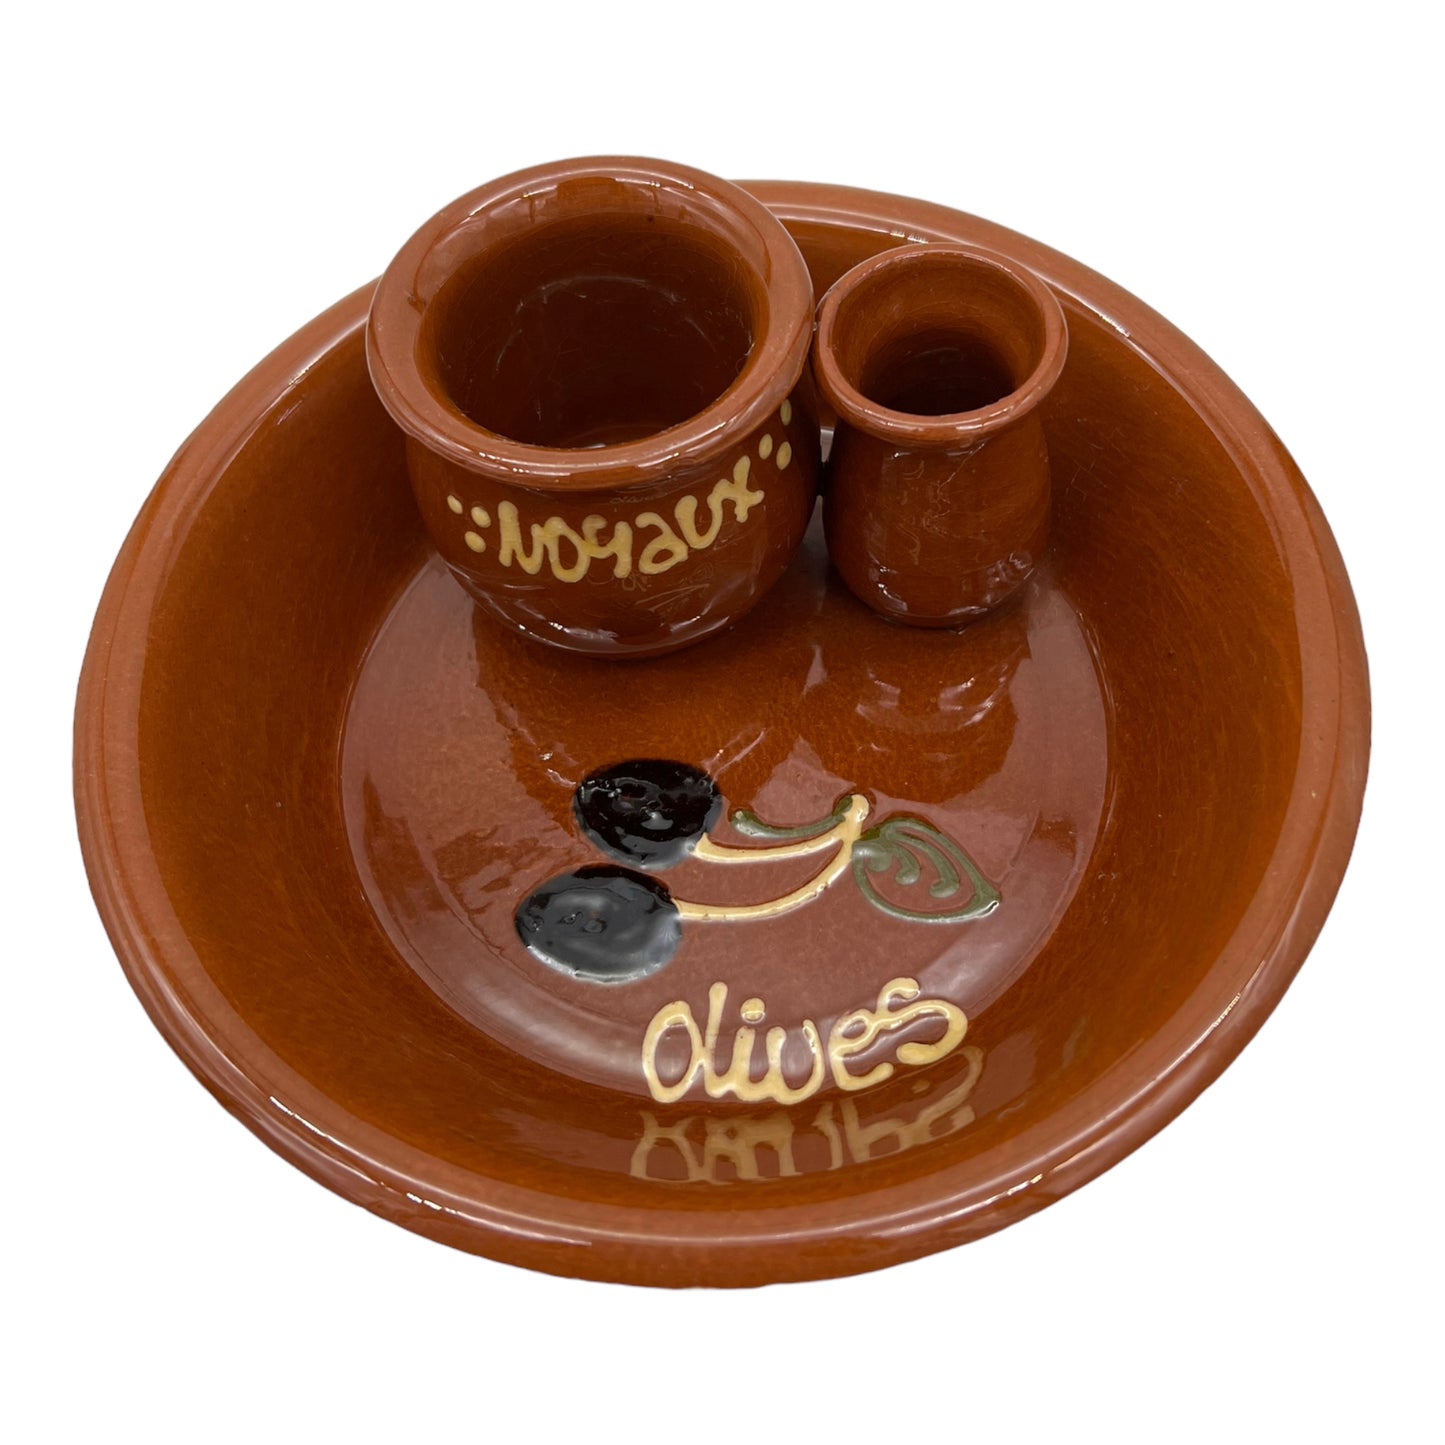 French traditional olive dish sold by All Things French Store